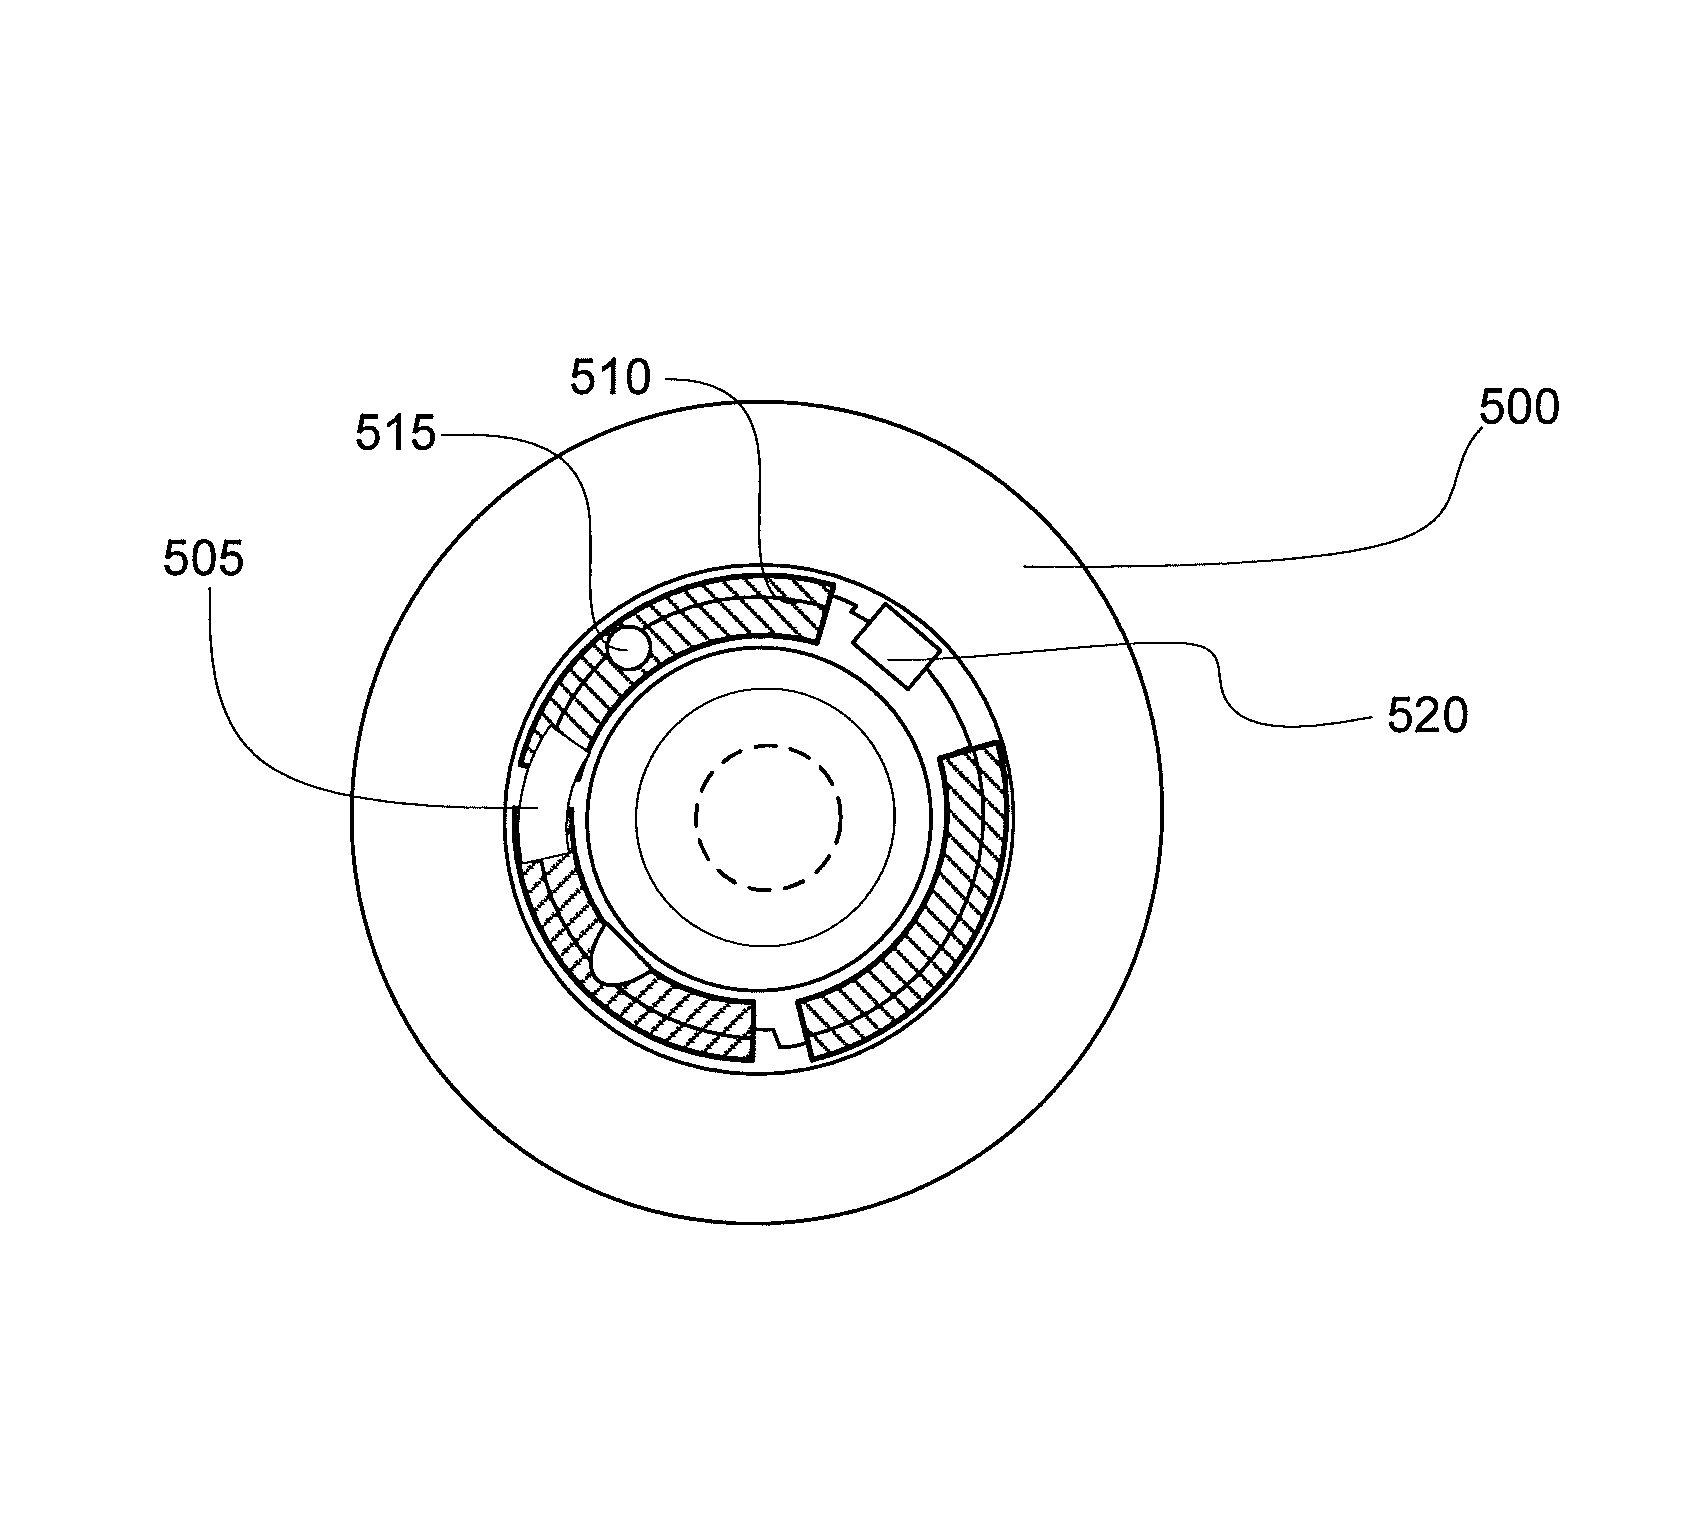 Ophthalmic lens system capable of wireless communication with multiple external devices